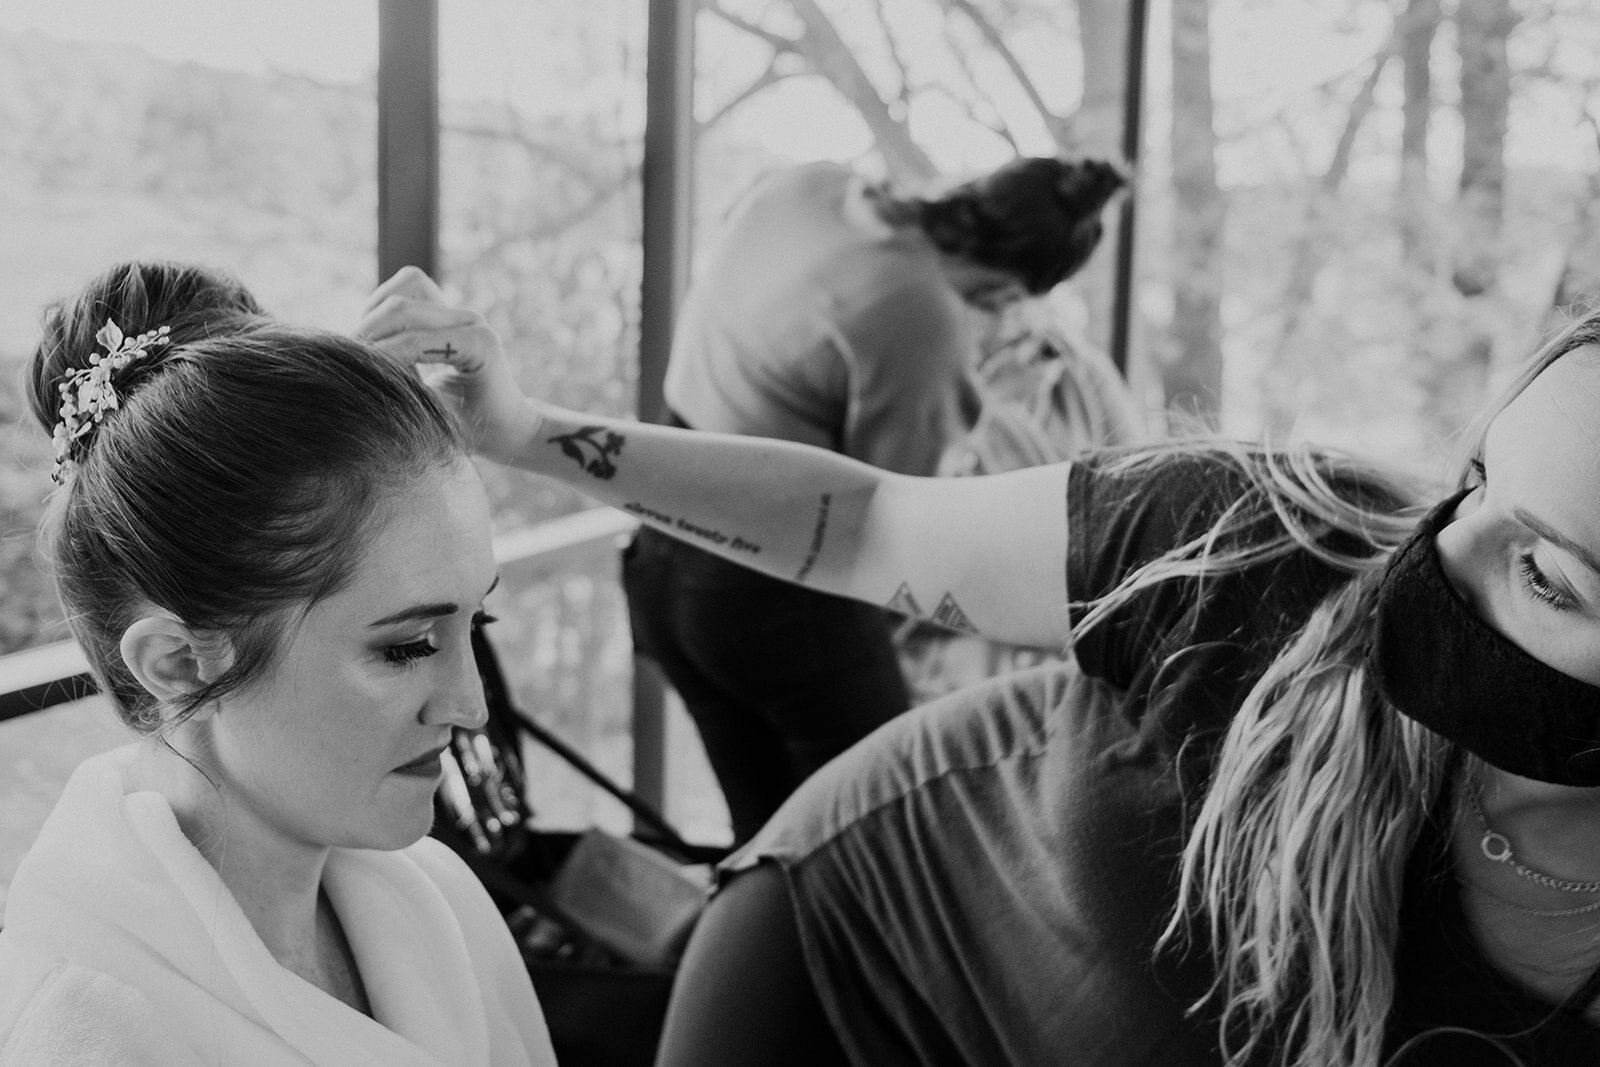 A hairstylist checks the bridal updo before the outdoor farm wedding ceremony.